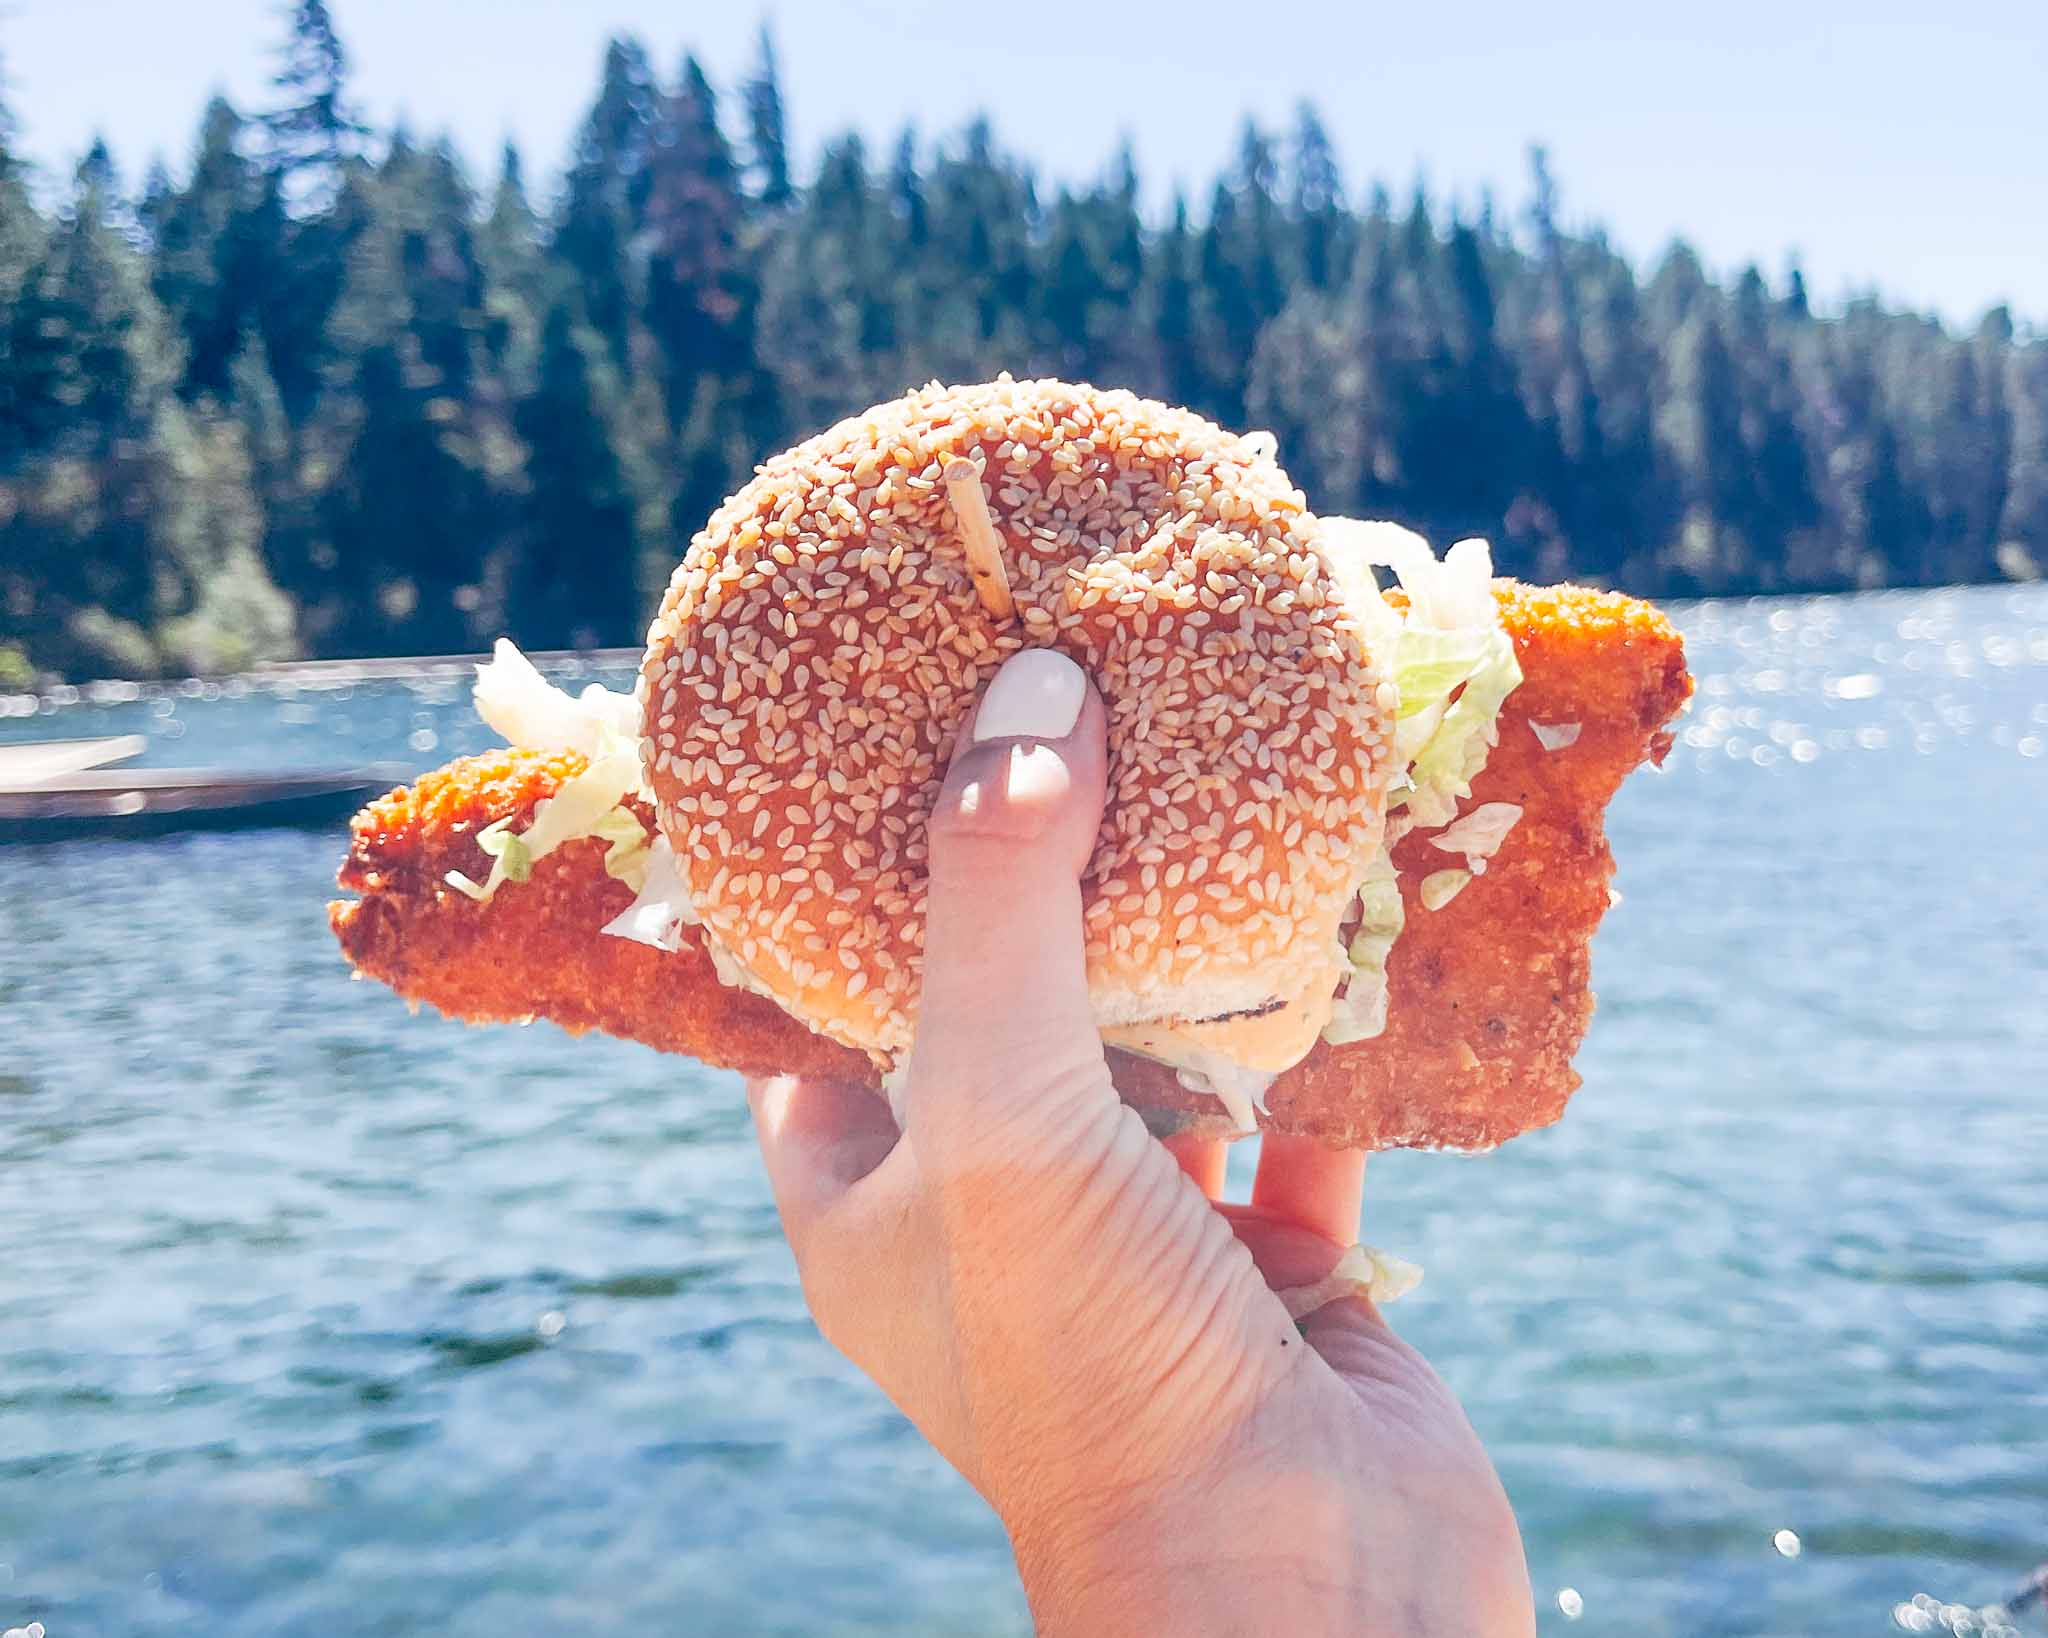 Hand holds a bun with sesame seeds, sandwiching a large piece of fried fish, with the lake in the background